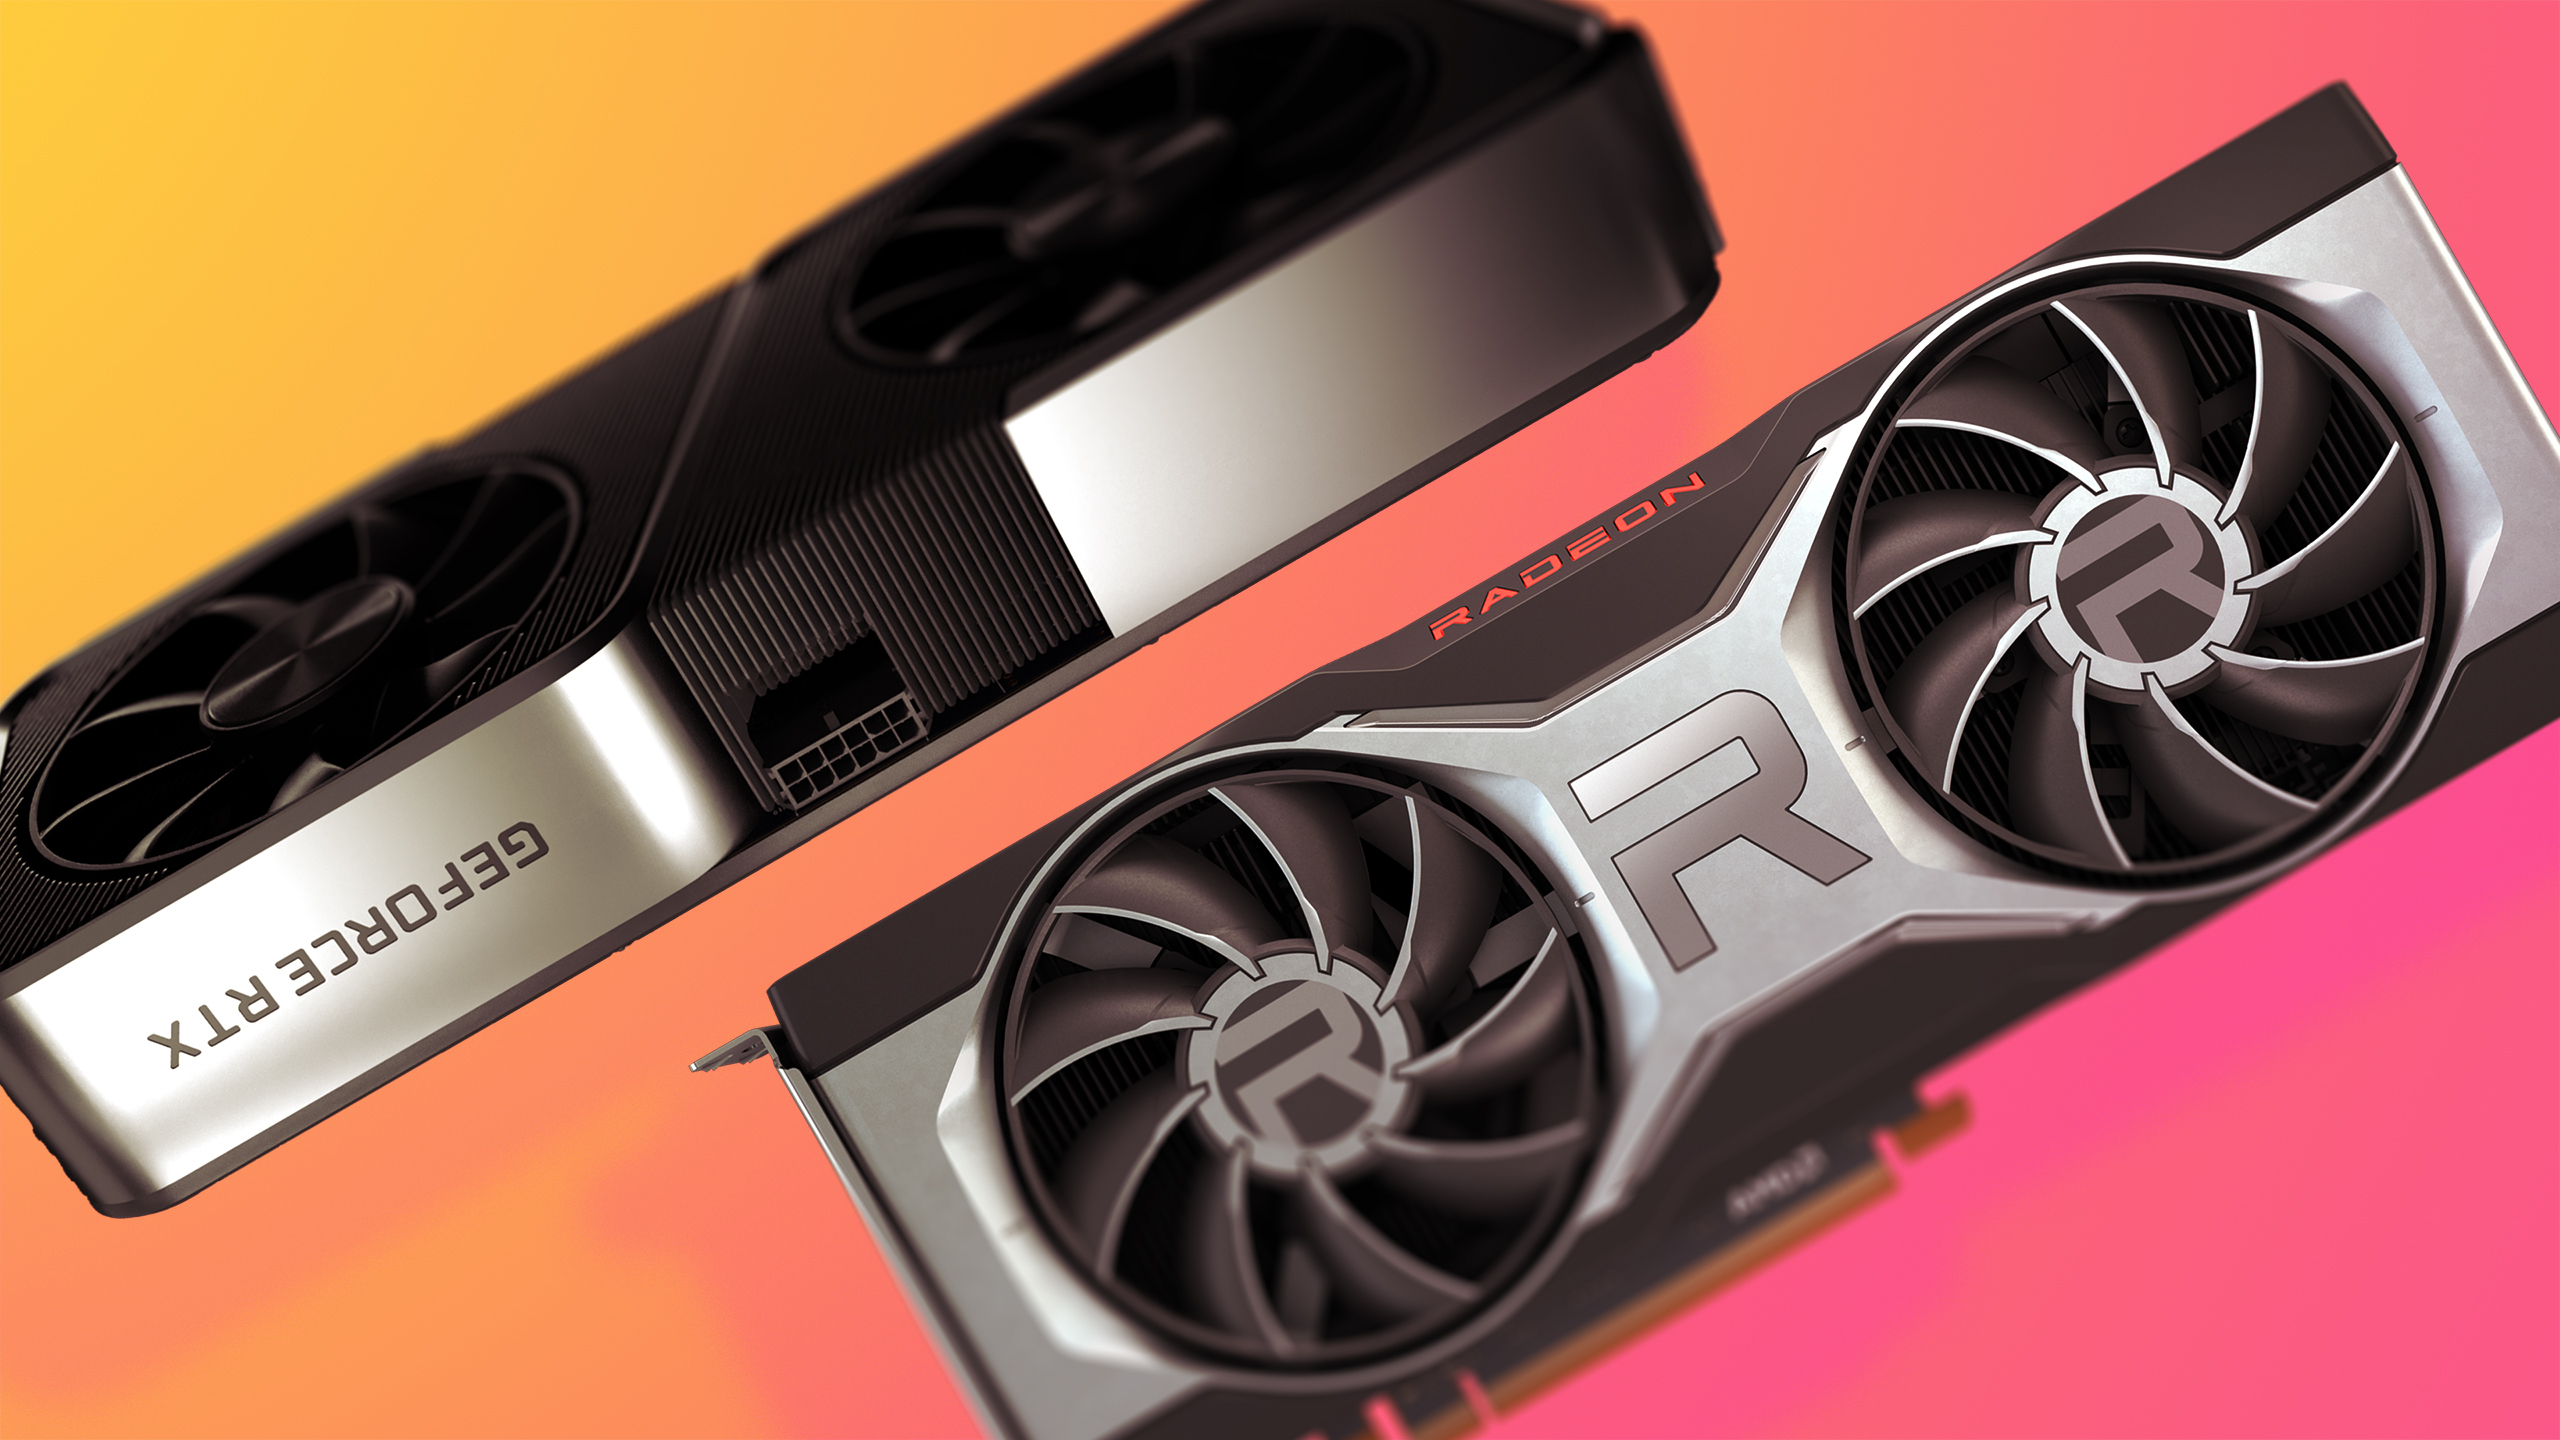 The Nvidia RTX 3070 and AMD RX 6700 XT side by side on a colored background